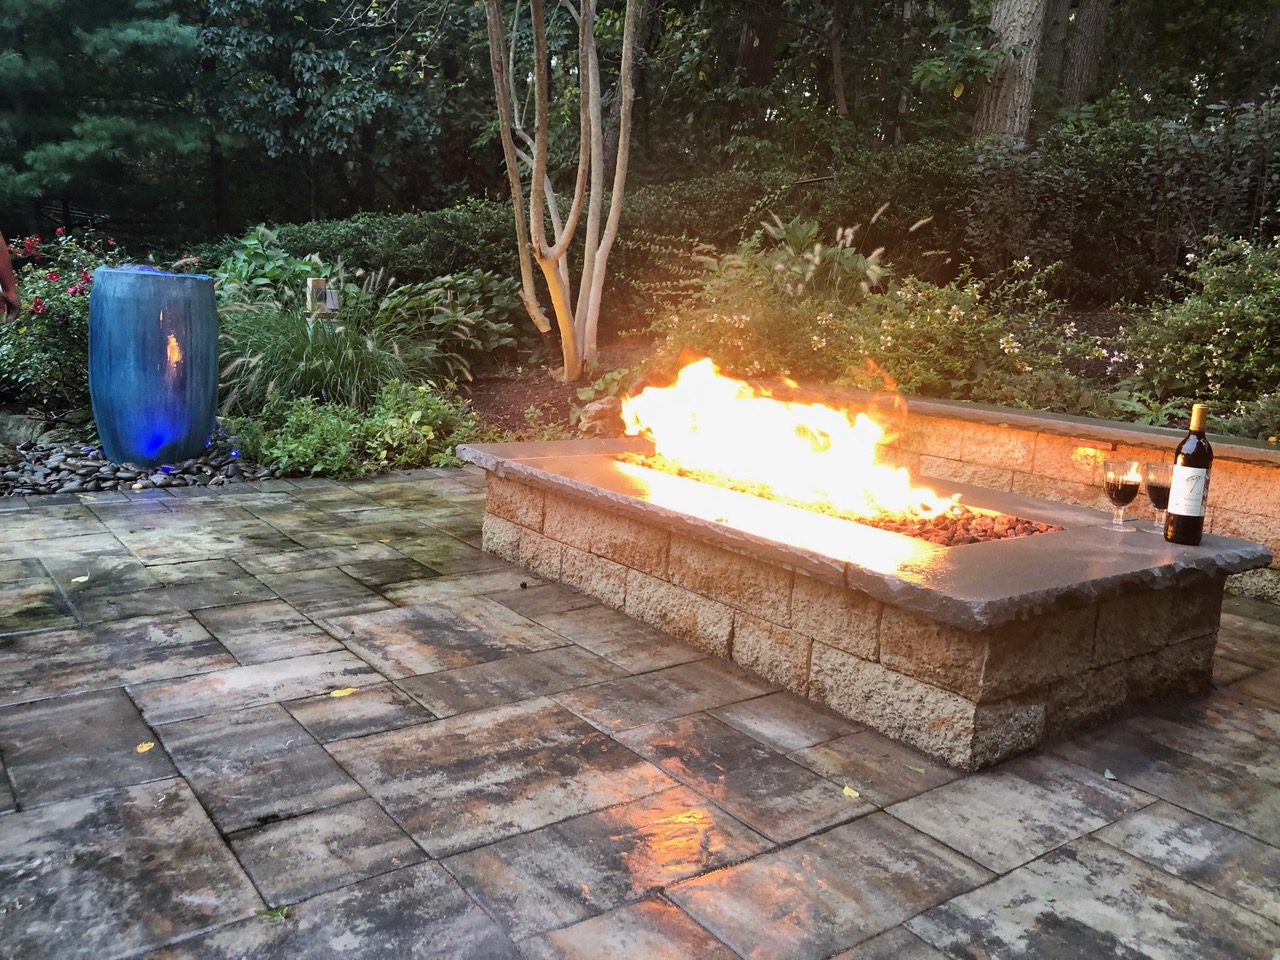 A fire pit is lit on the side of a patio.